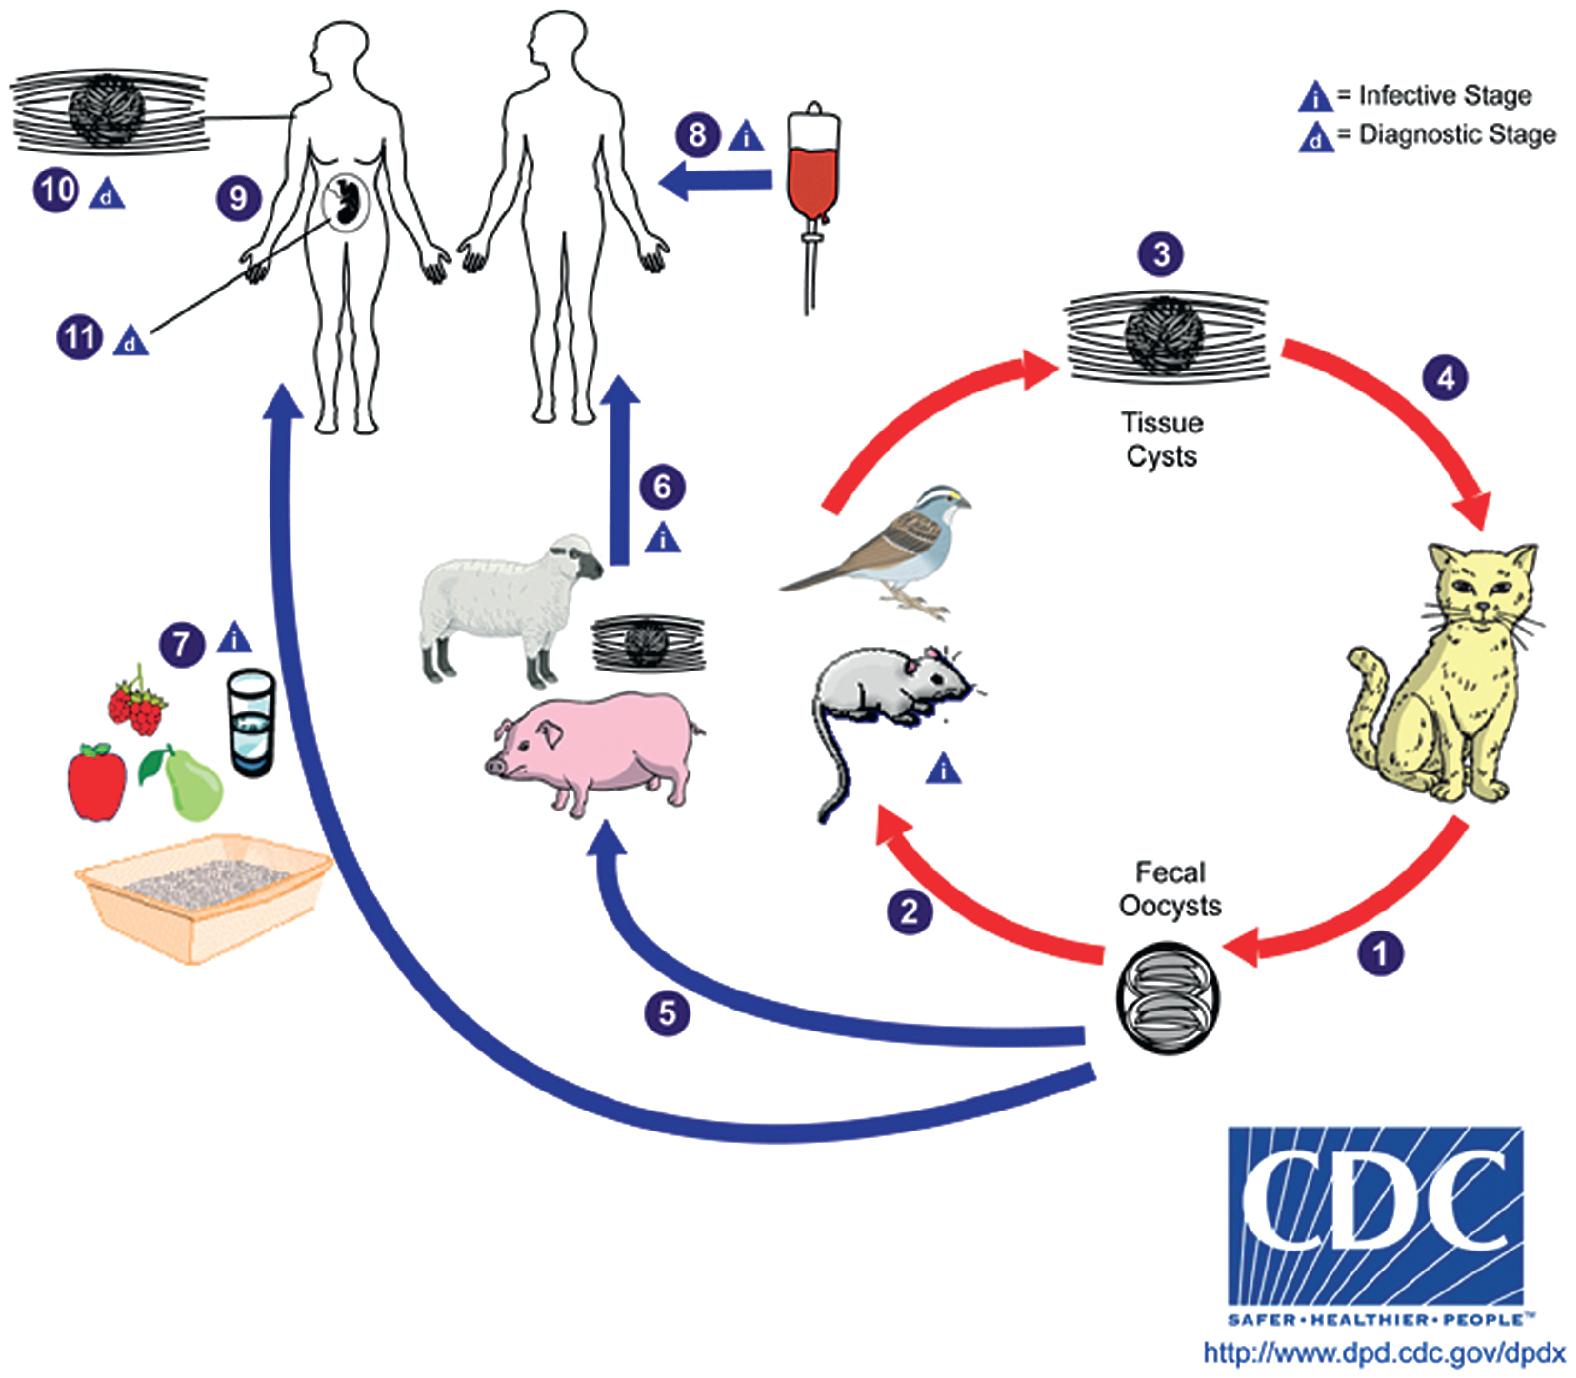 FIGURE 88.29, Life cycle of Toxoplasma gondii. Felines are the only known definitive host for T. gondii. Infected cats (wild and domestic) shed infective oocysts in their feces (1) , and these mature in the environment and become infectious to a variety of other animals, which serve as intermediate hosts. In the natural cycle, sporulated oocysts are commonly ingested by birds and rodents, which transform into rapidly dividing tachyzoites and infect neural and muscle tissue. Once in tissue, the tachyzoites form tissue cysts that contain bradyzoites (3) . New feline hosts become infected when ingesting the tissue cysts in infected animals (4) . Other animals, including those bred for human consumption, can also develop tissue cysts after ingesting environmental oocysts (5) . Humans can then become infected by ingesting tissue cysts (i) in undercooked meat from these animals (6) . Humans also become infected by ingesting oocysts (i) in contaminated food and water, or by inadvertently ingesting oocysts on contaminated hands after handling cat feces (7) . Lastly, humans can become infected with T. gondii through blood transfusion (8) , organ transplantation, and transplacentally (9) . As seen in other animals, humans develop tissue cysts in brain, muscle, and other organs (10) . Infection is most commonly diagnosed by serology, but tissue cysts and free tachyzoites may also be observed directly from infected tissues (d) , and parasite DNA (d) can be detected in tissue, cerebrospinal fluid, amniotic fluid (11) , and other sources.